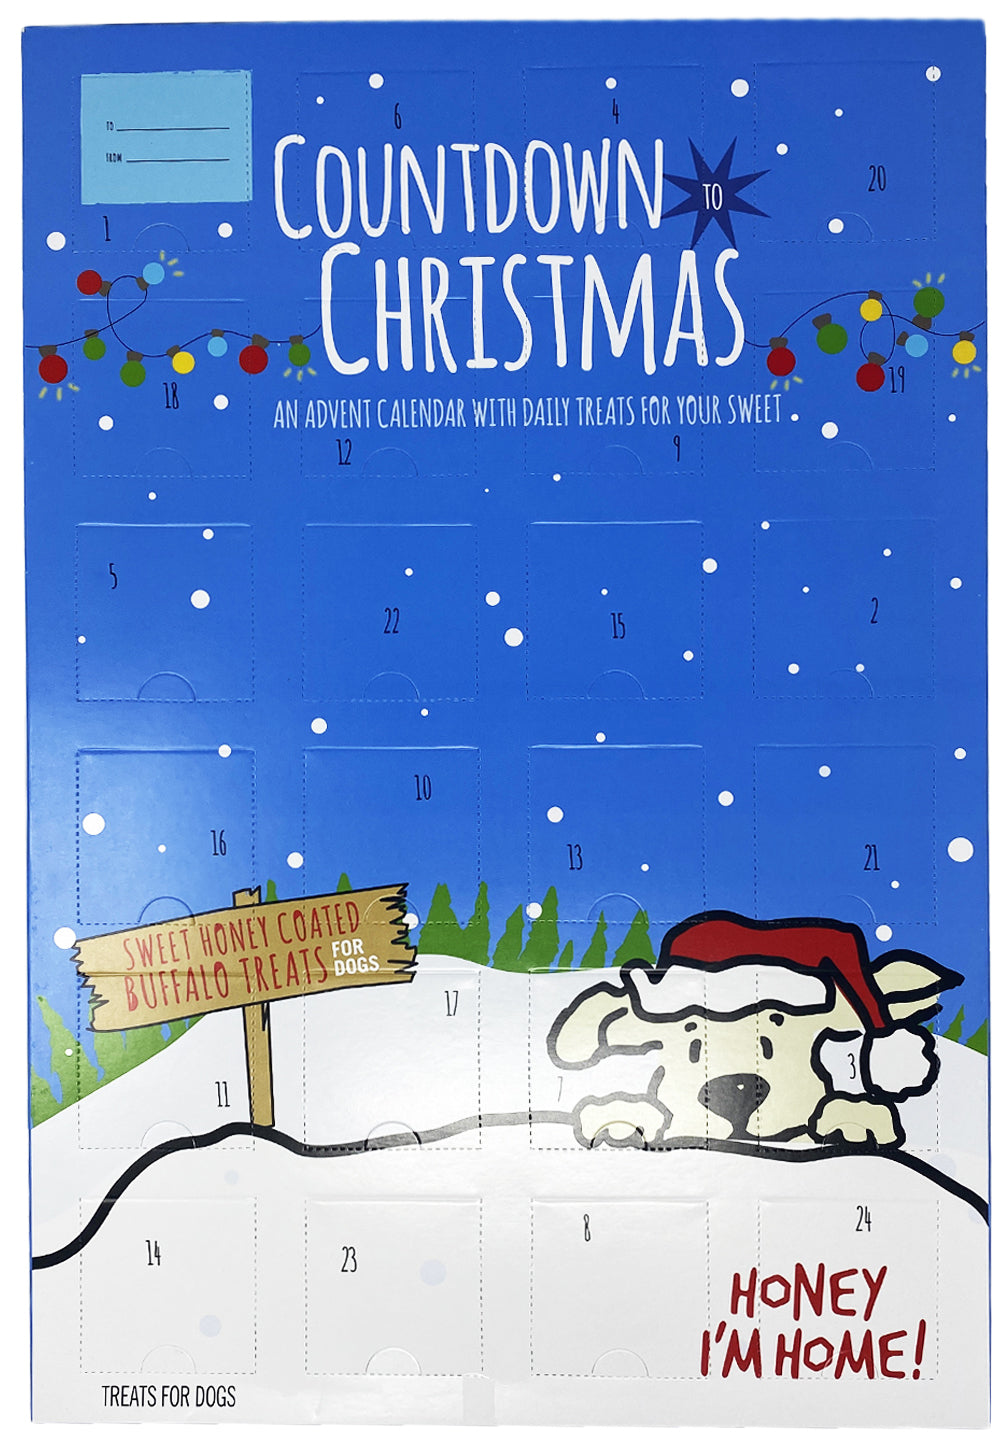 Countdown to Christmas Holiday Advent Calendar front w/ blue sky, snow and white pup w/santa hat.